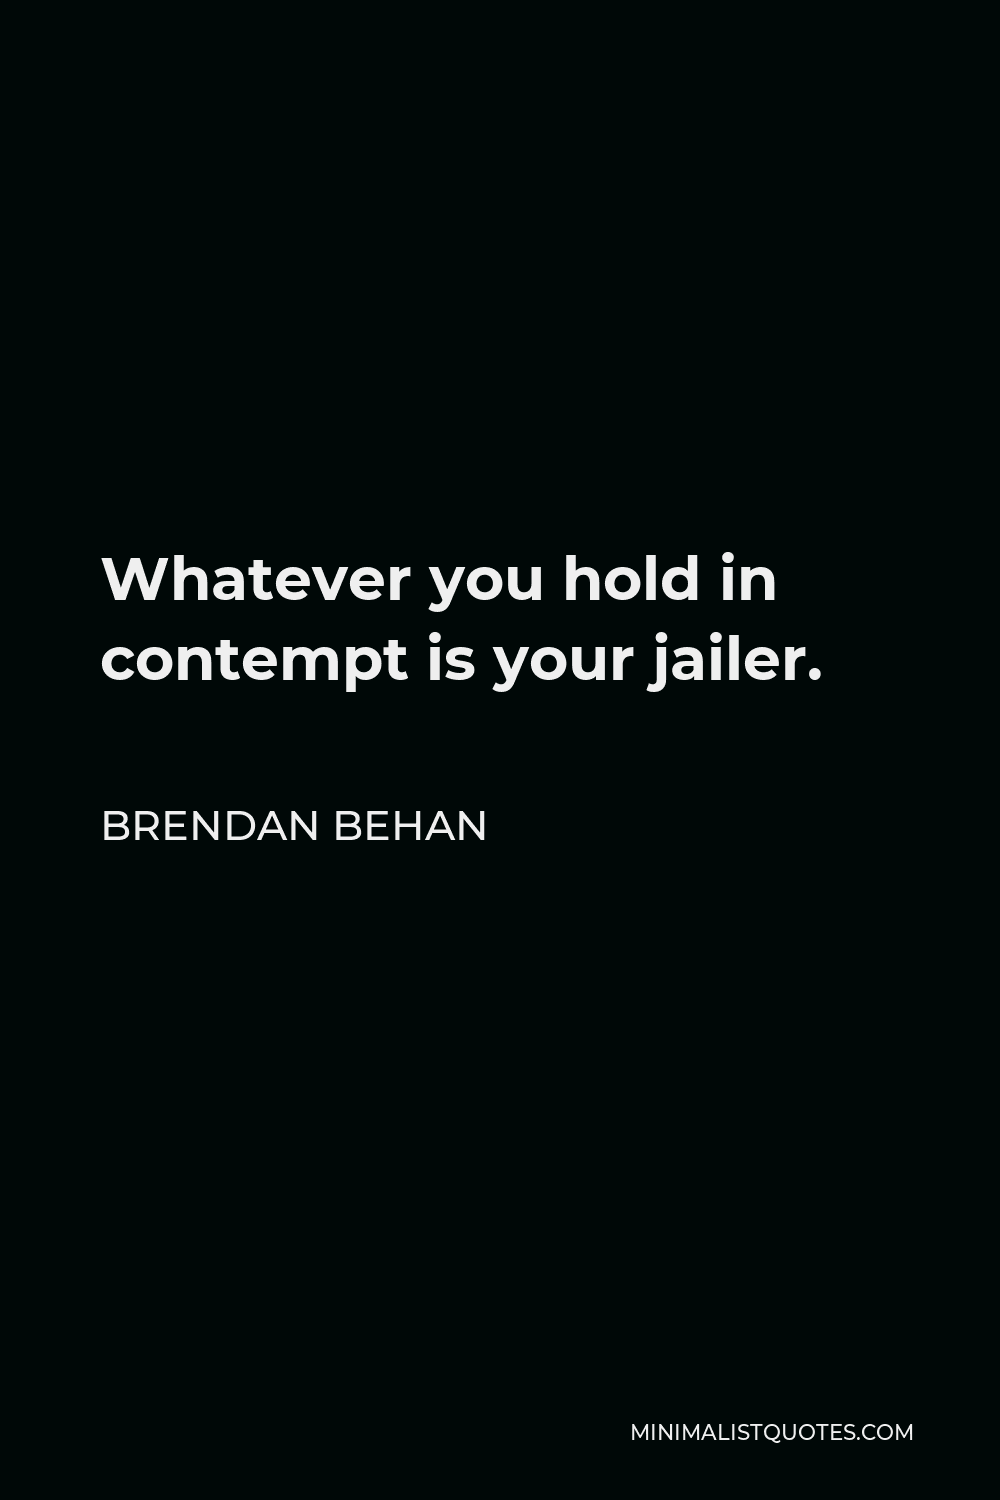 Brendan Behan Quote - Whatever you hold in contempt is your jailer.